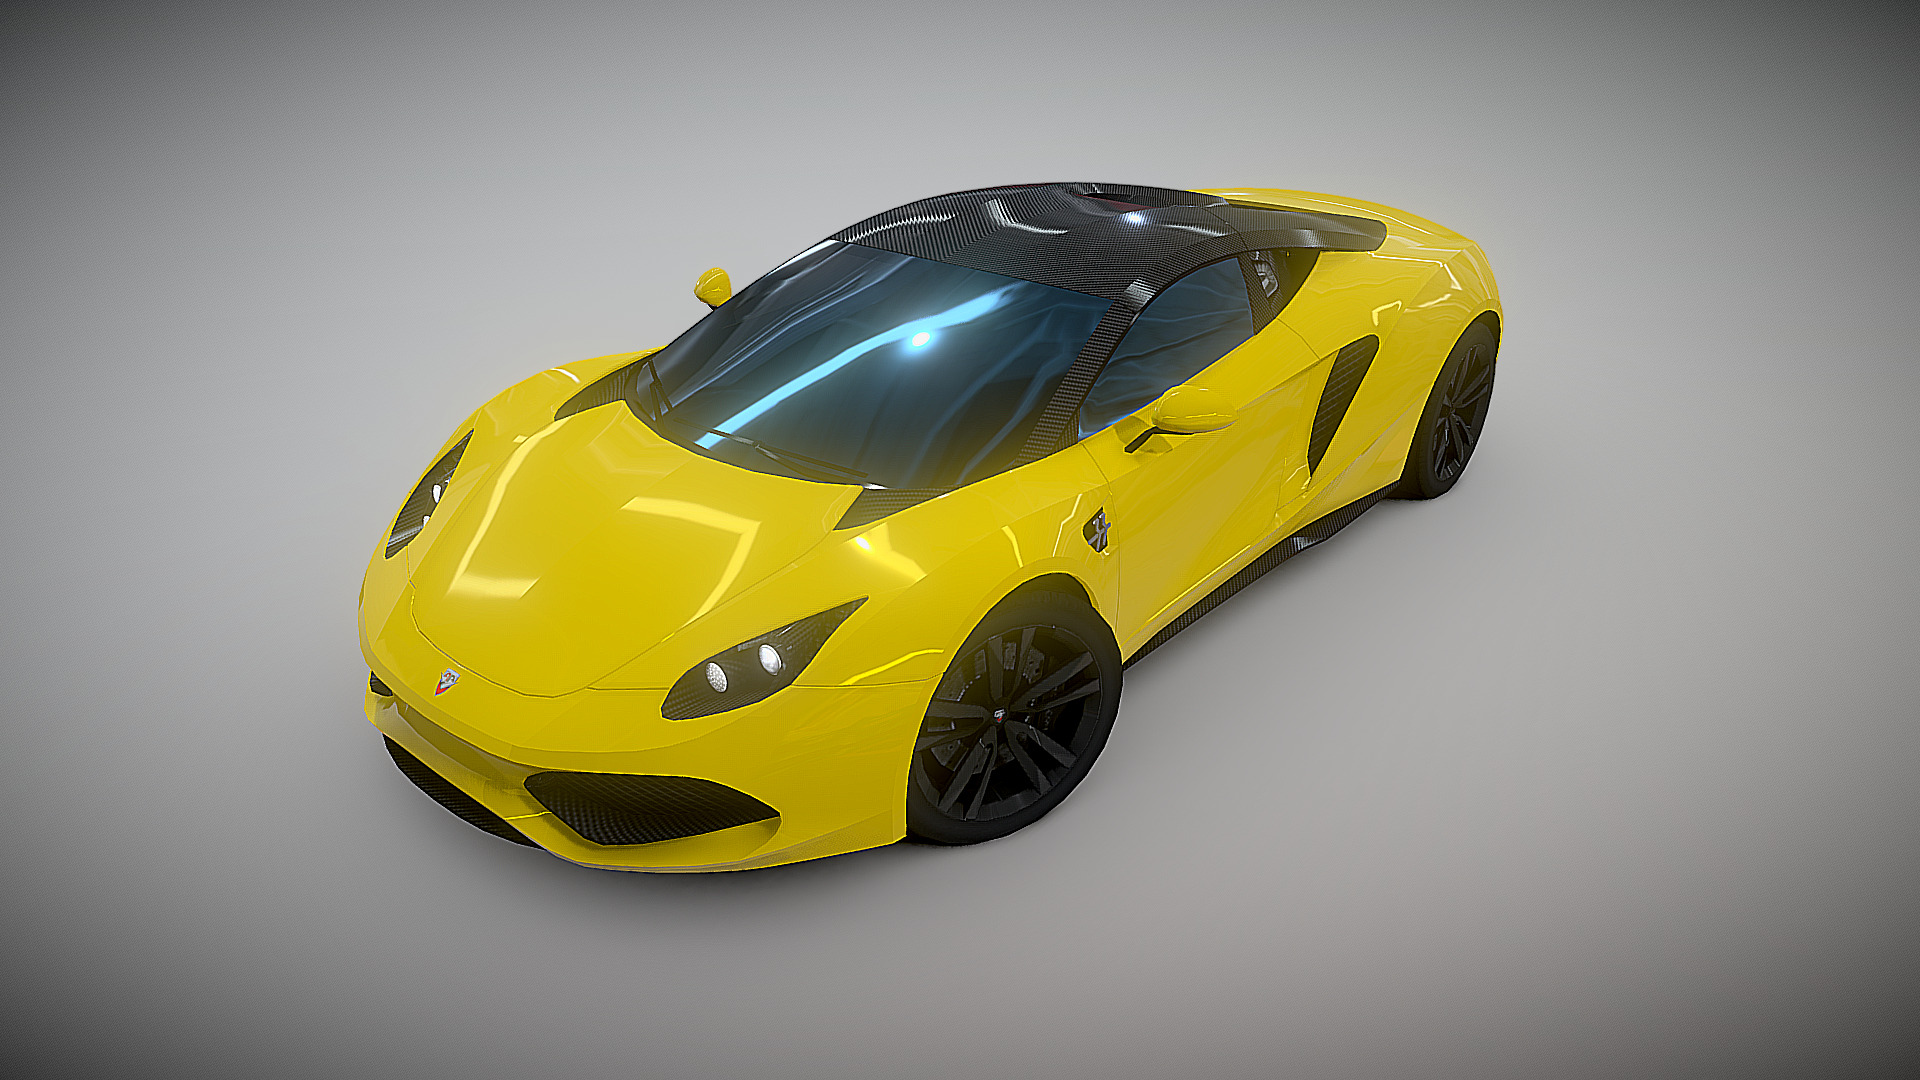 Low poly model for a unity3D VR visualization scene
Dont Ask for free downloads, it will never happen! - Arrinera Hussarya Sports GT - 3D model by OGL (@GaryLim) 3d model